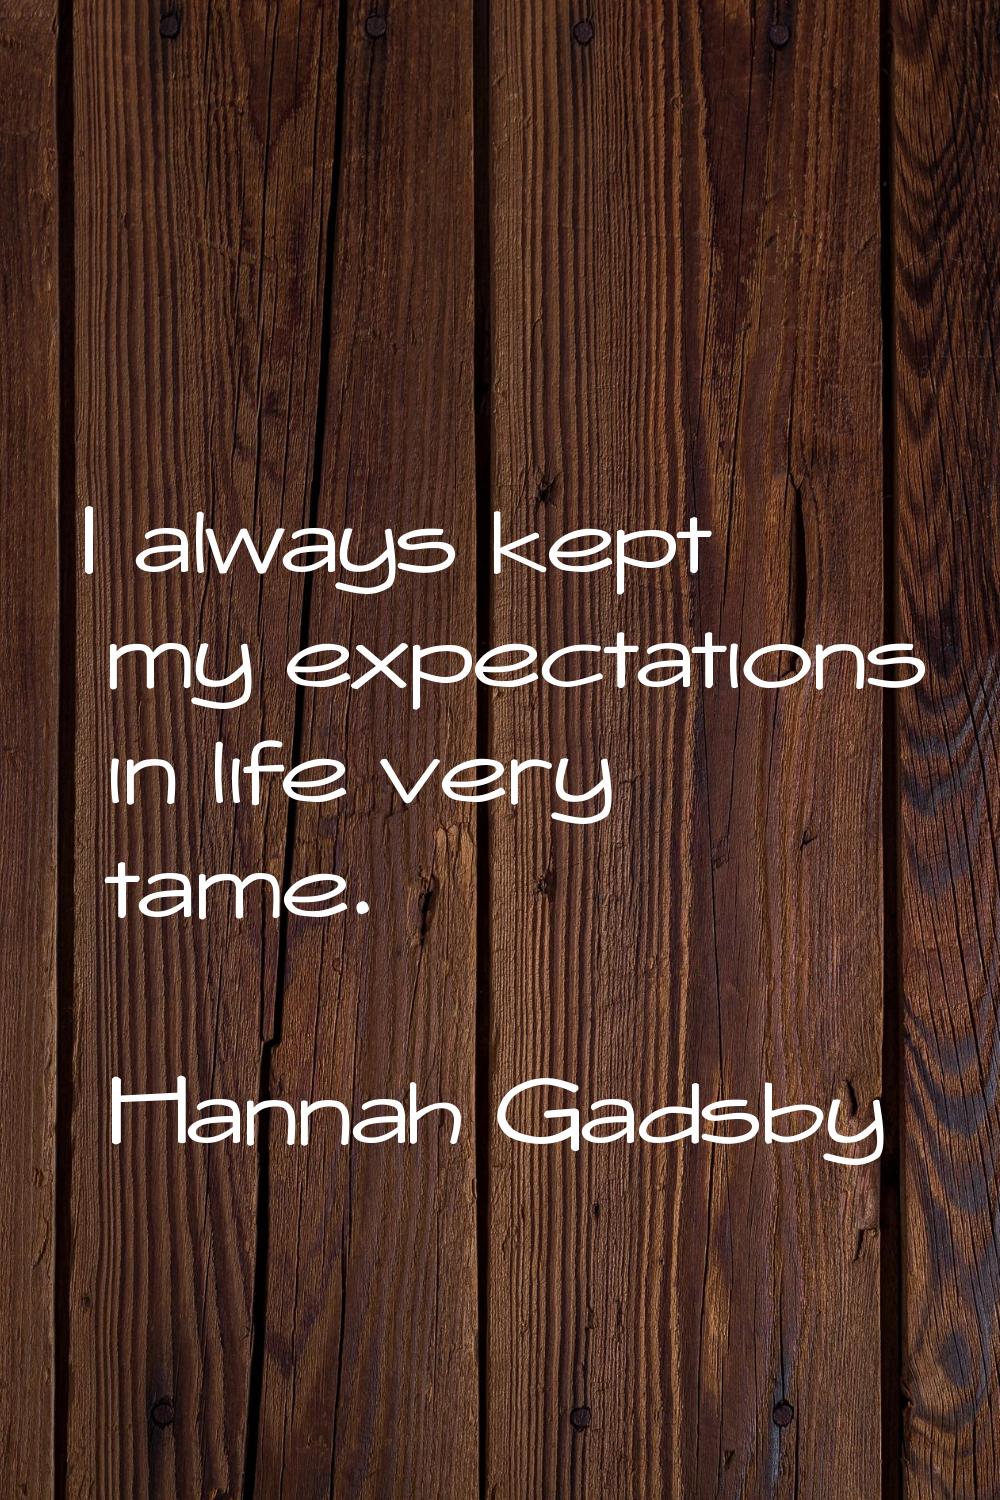 I always kept my expectations in life very tame.